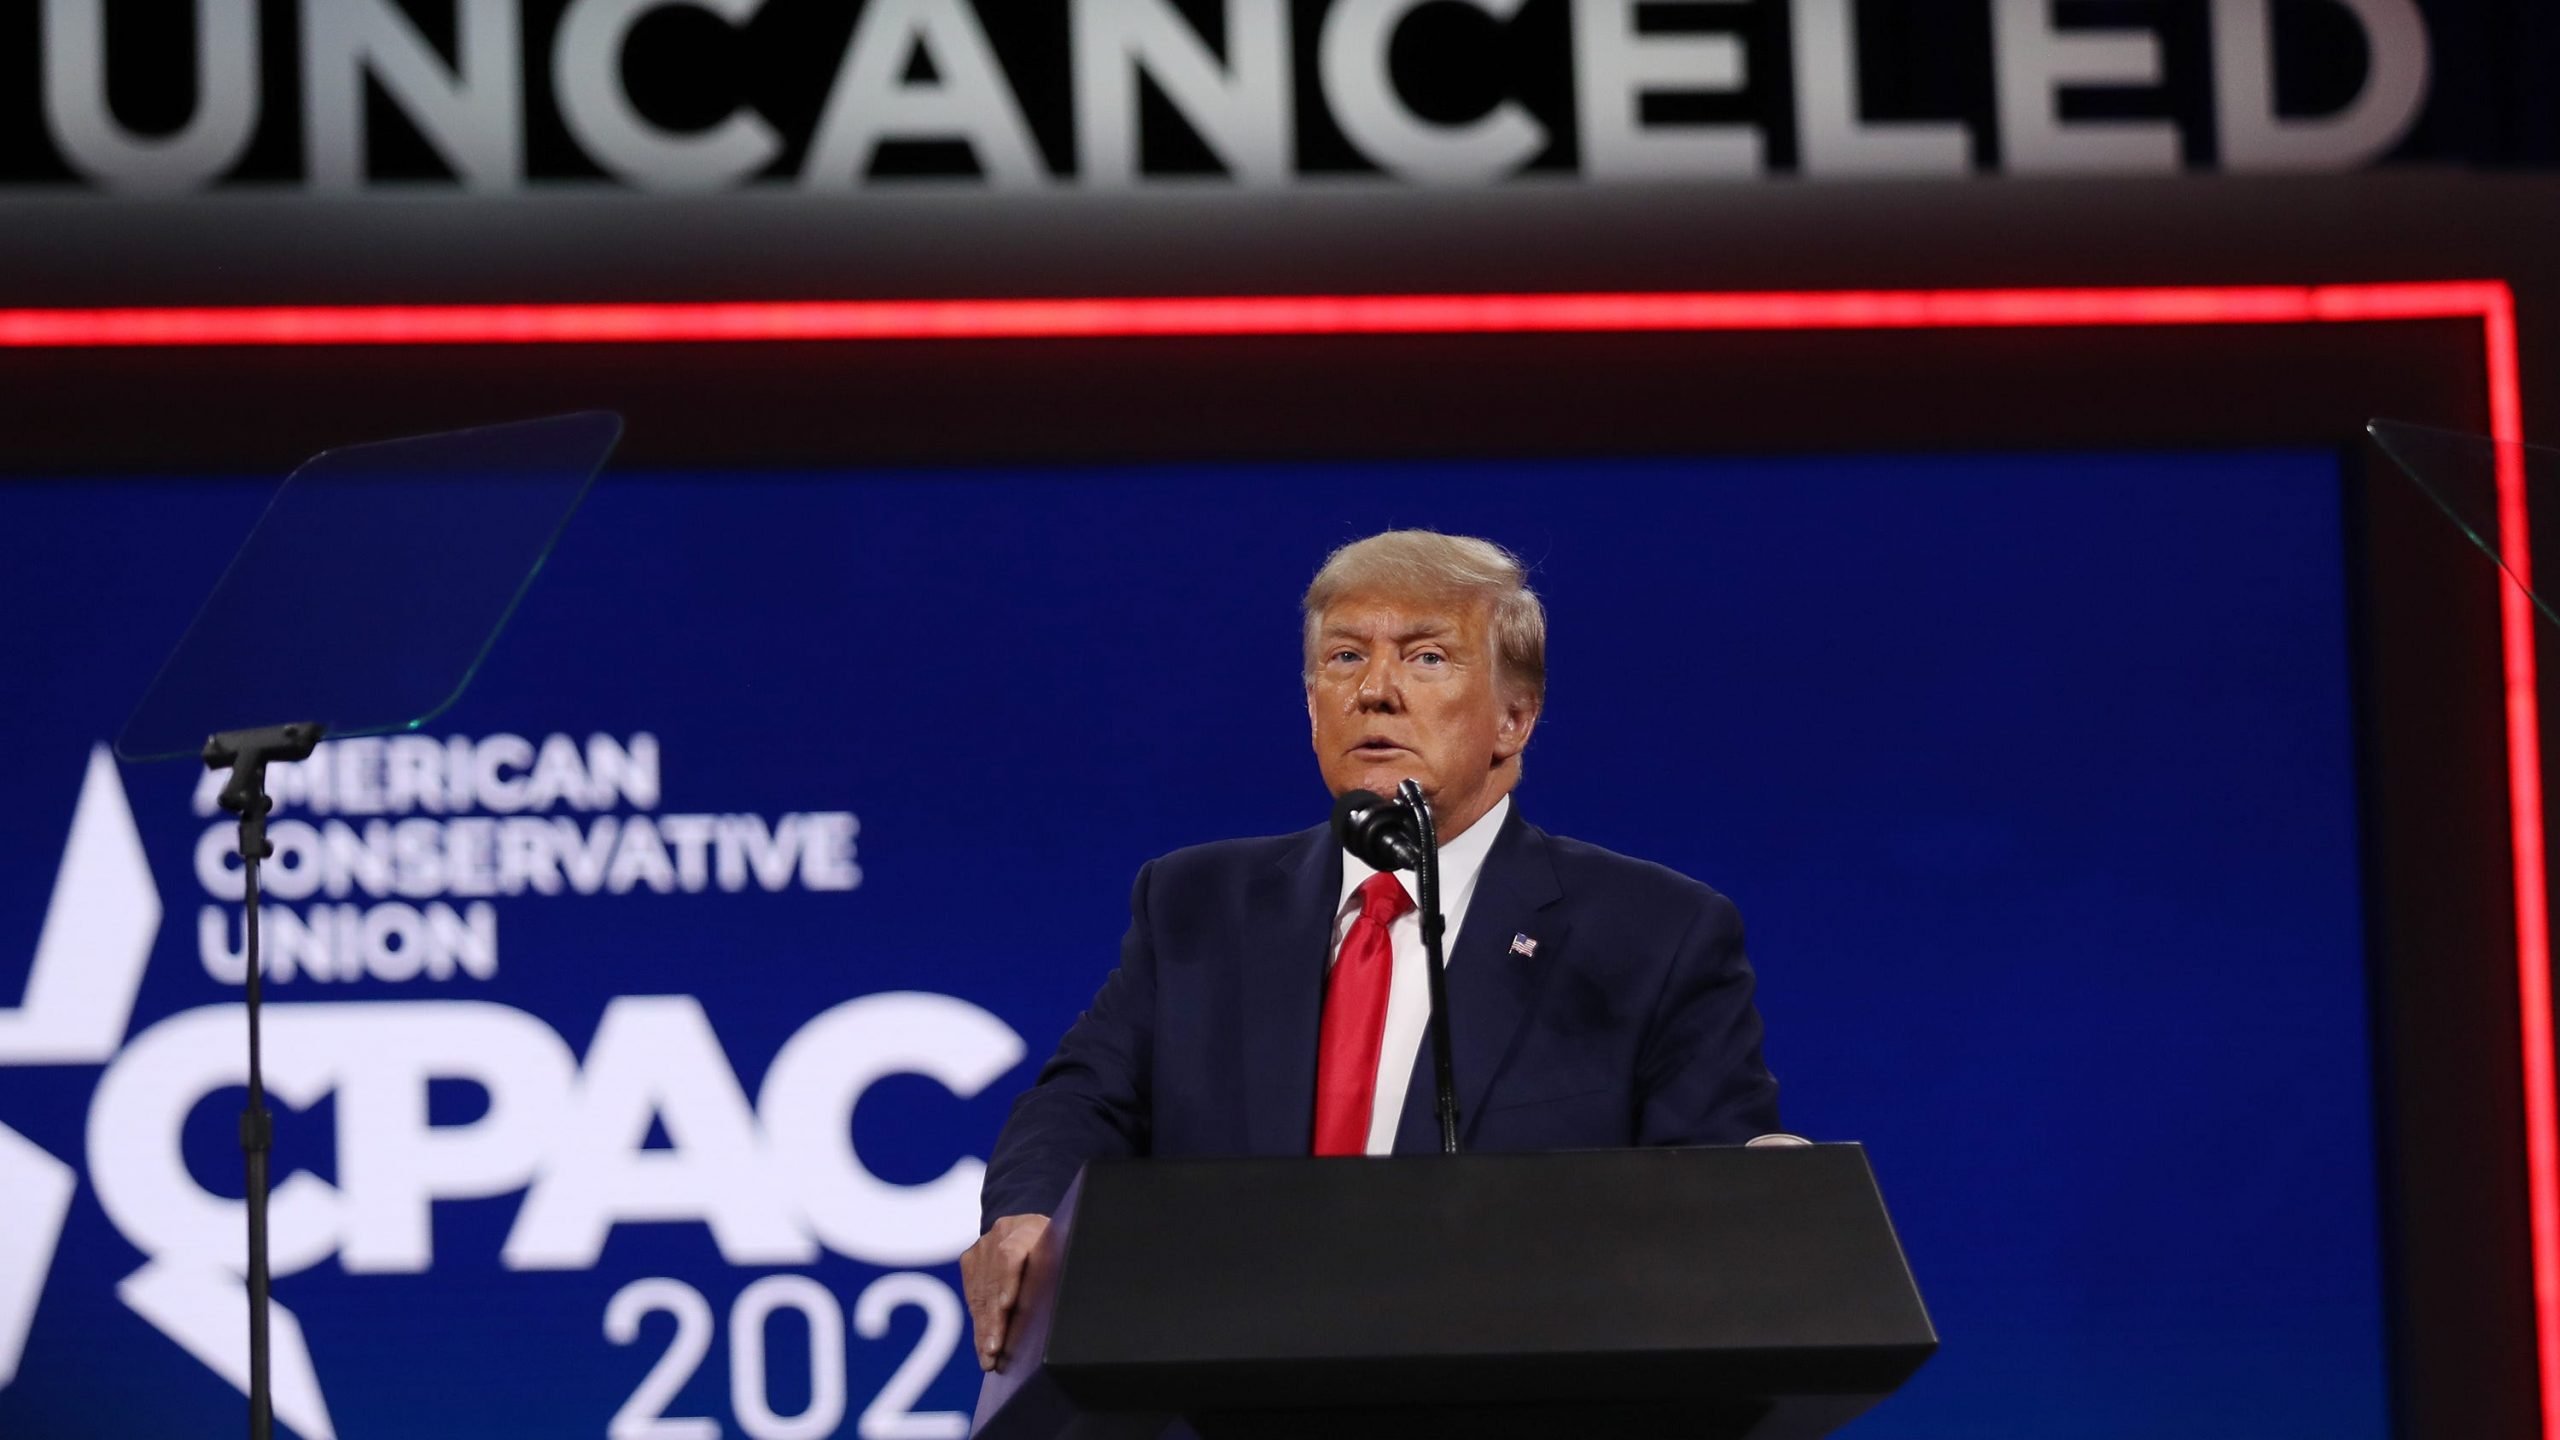 Trump CPAC comeback speech showed a sad little man angry at the world